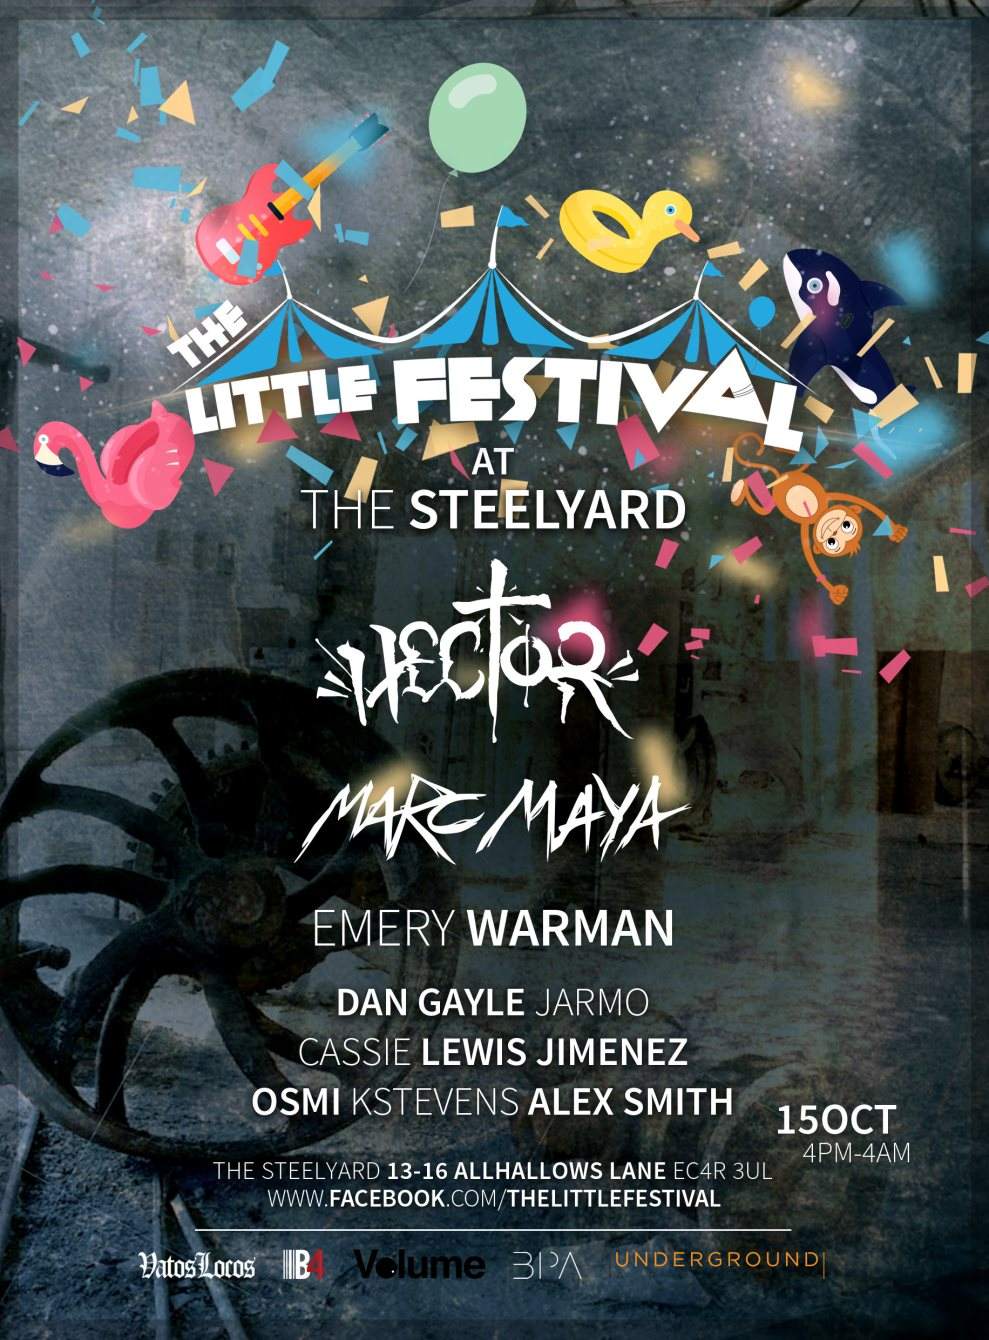 The Little Festival at The Steelyard - 12hr Day & Night Event - Página frontal